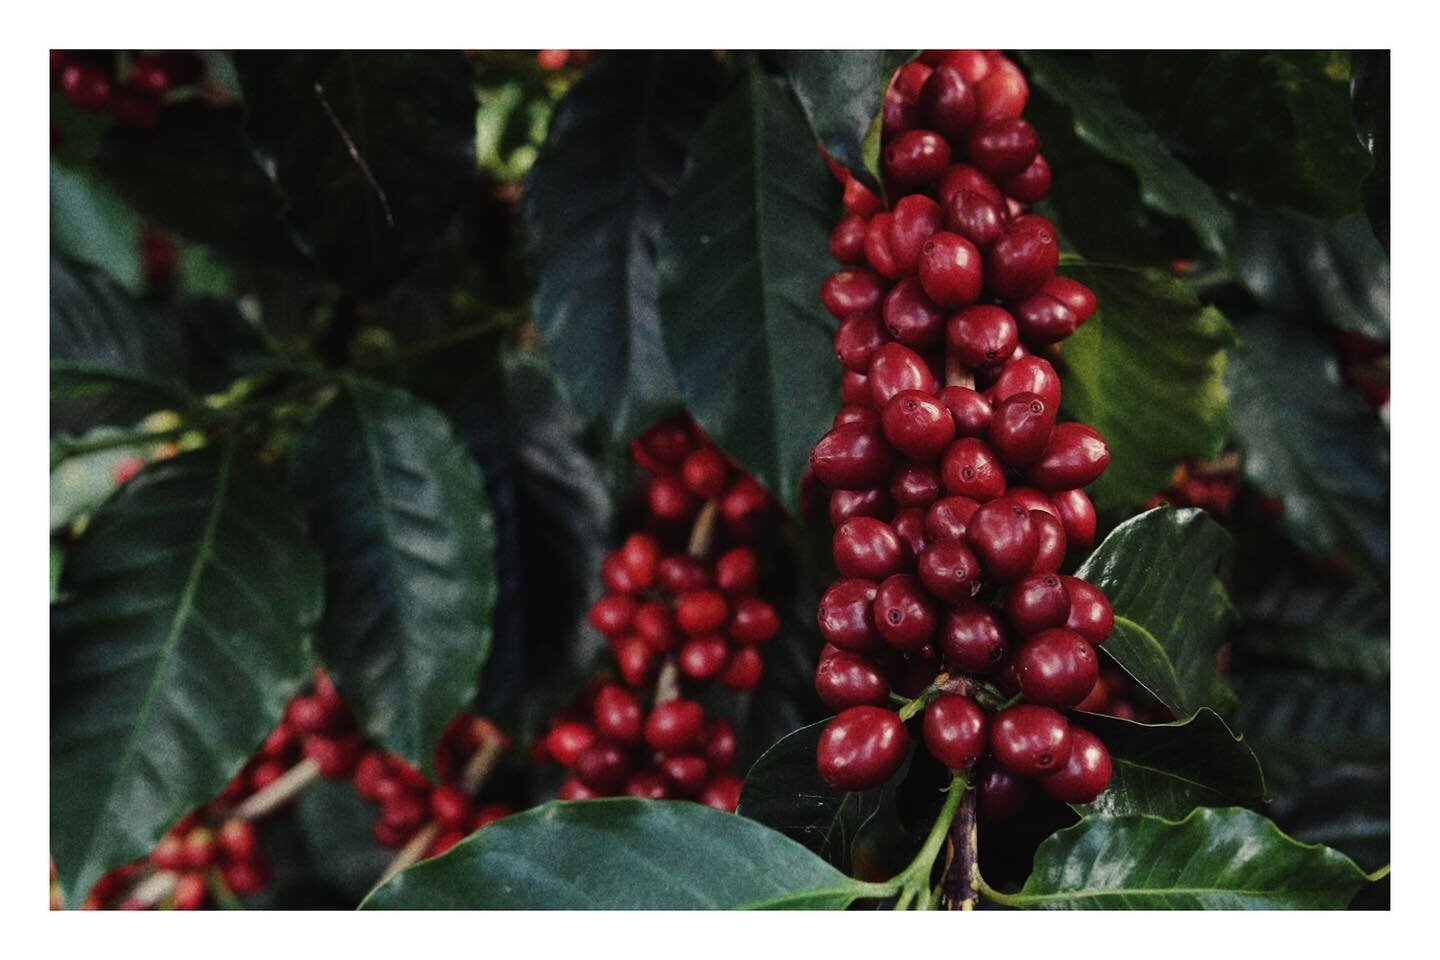 Our parents grew coffee, our grandparents too. This coming Monday marks the start of a new harvest. Big hopes. Big dreams. 
.
.
.

#specialtycoffeeassociation #specialtycoffee #coffeeroastersguild #coffeeculture #coffeeaddict #coffeeharvest #coffeero